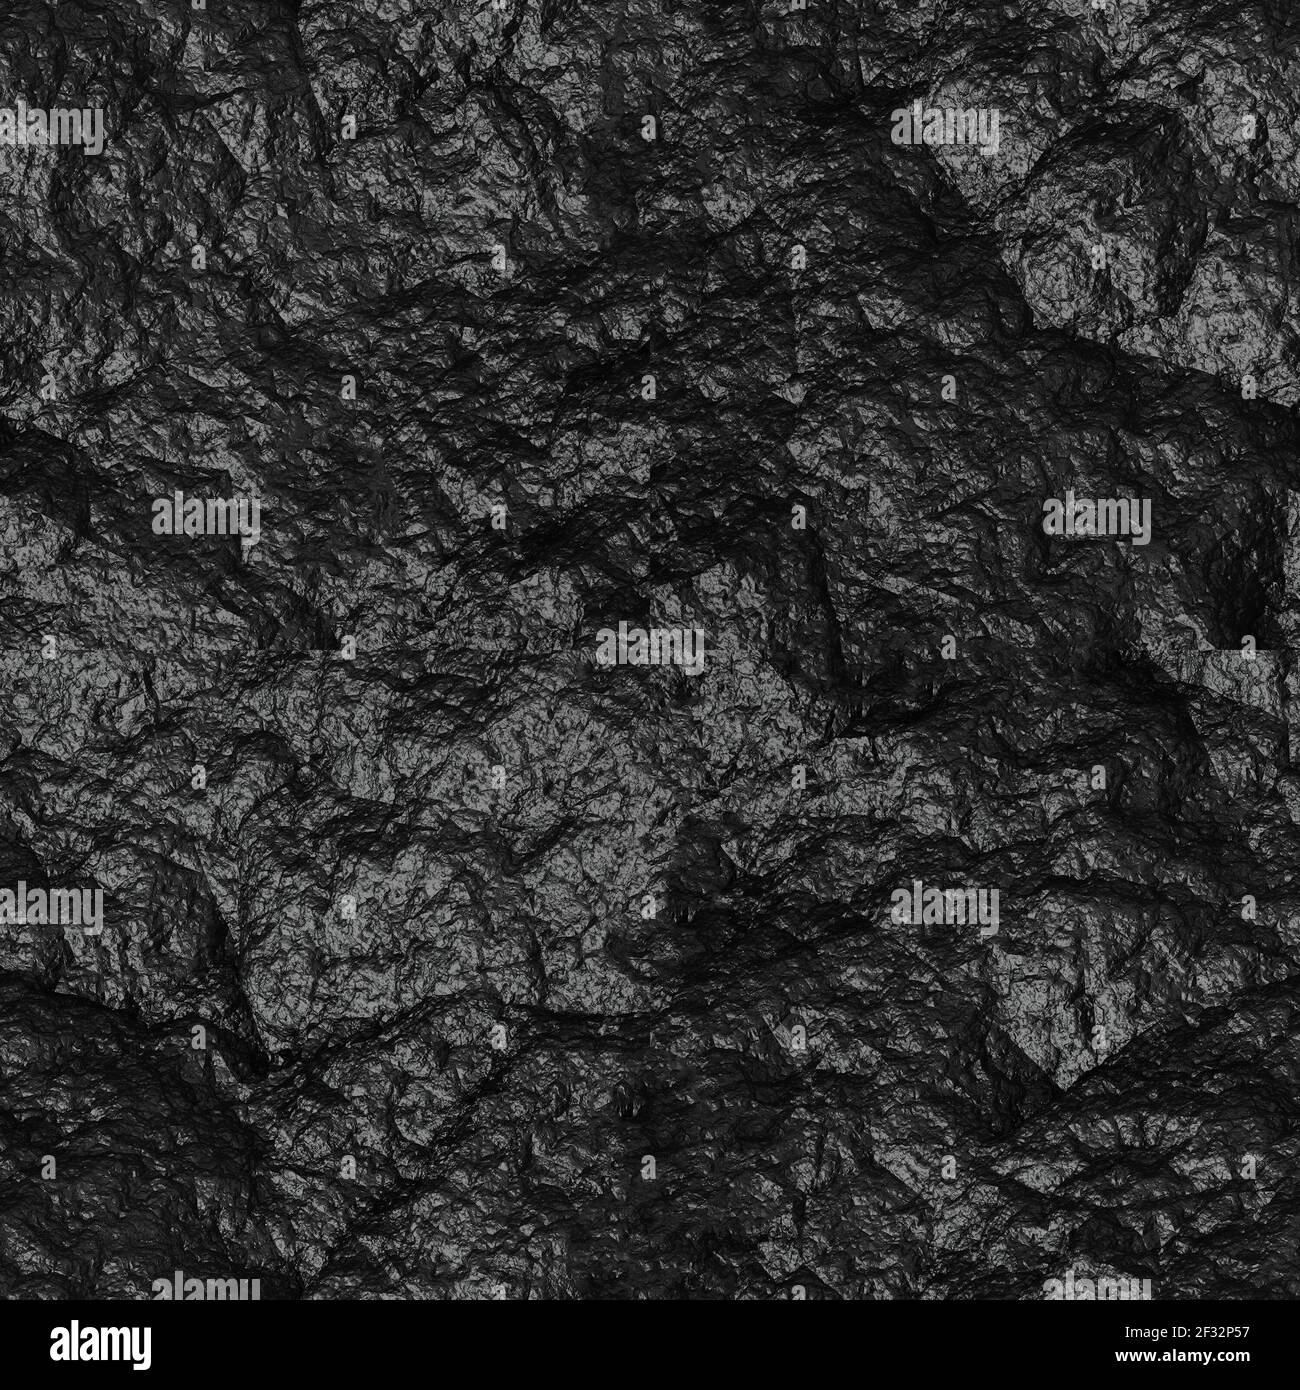 Seamless texture of black glossy rough stone. 3d illustration Stock Photo